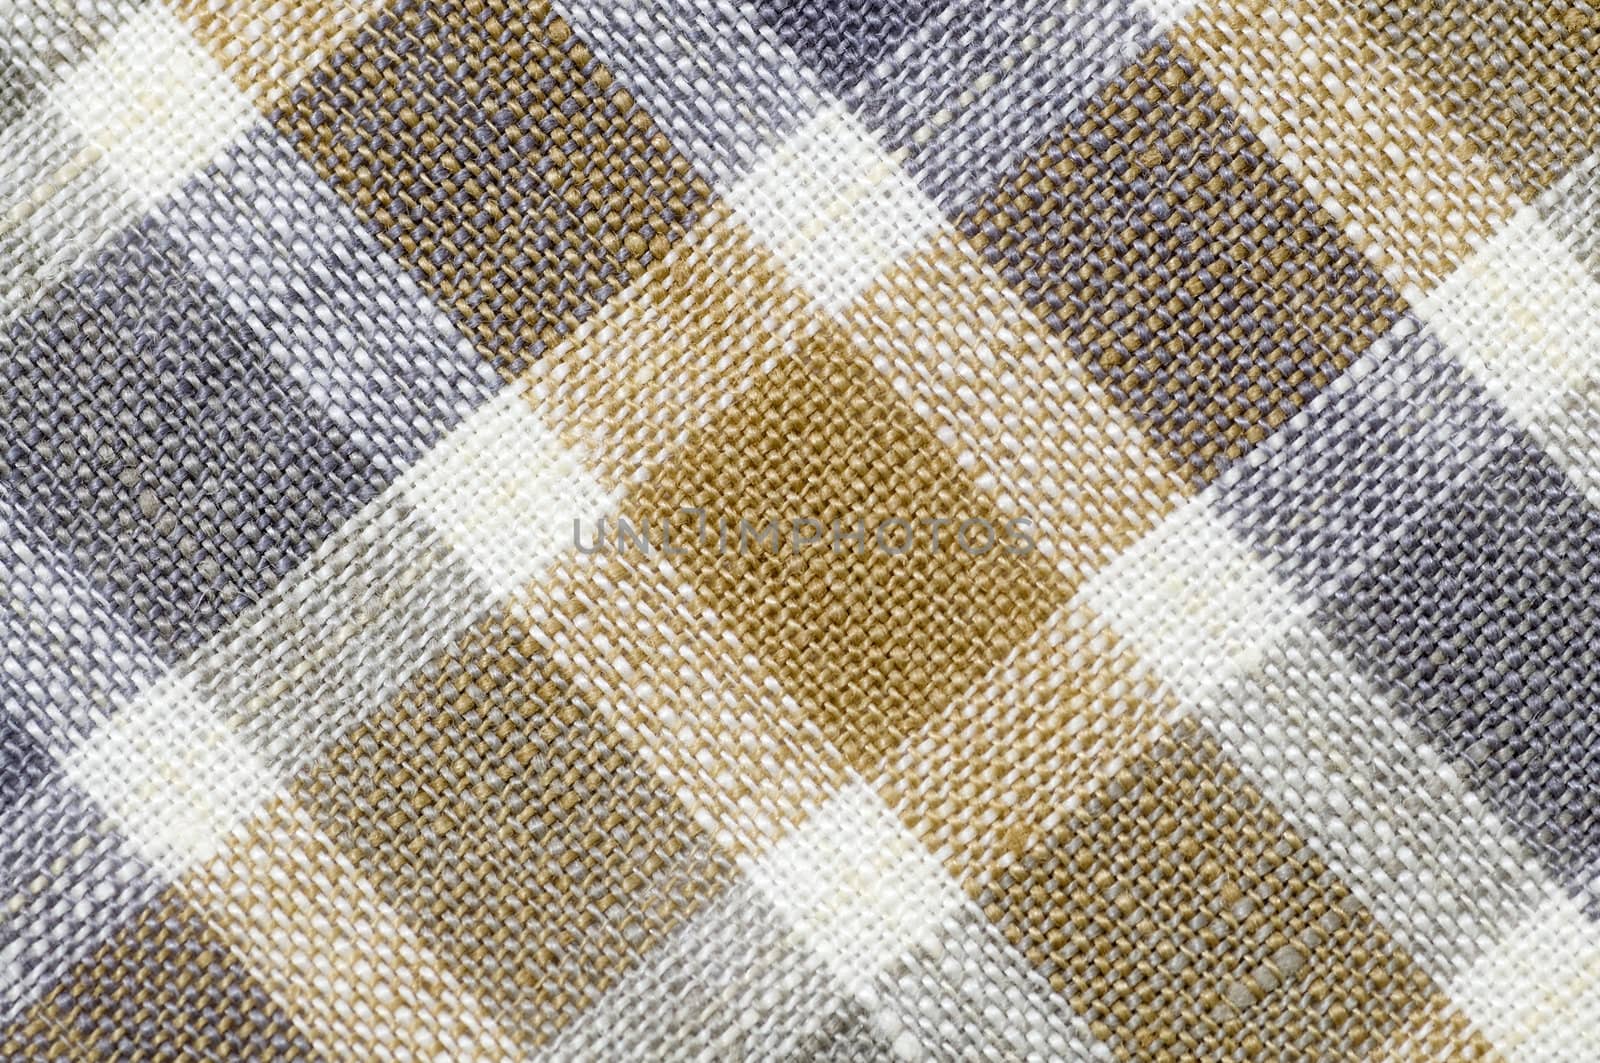 Gridded fabric background 